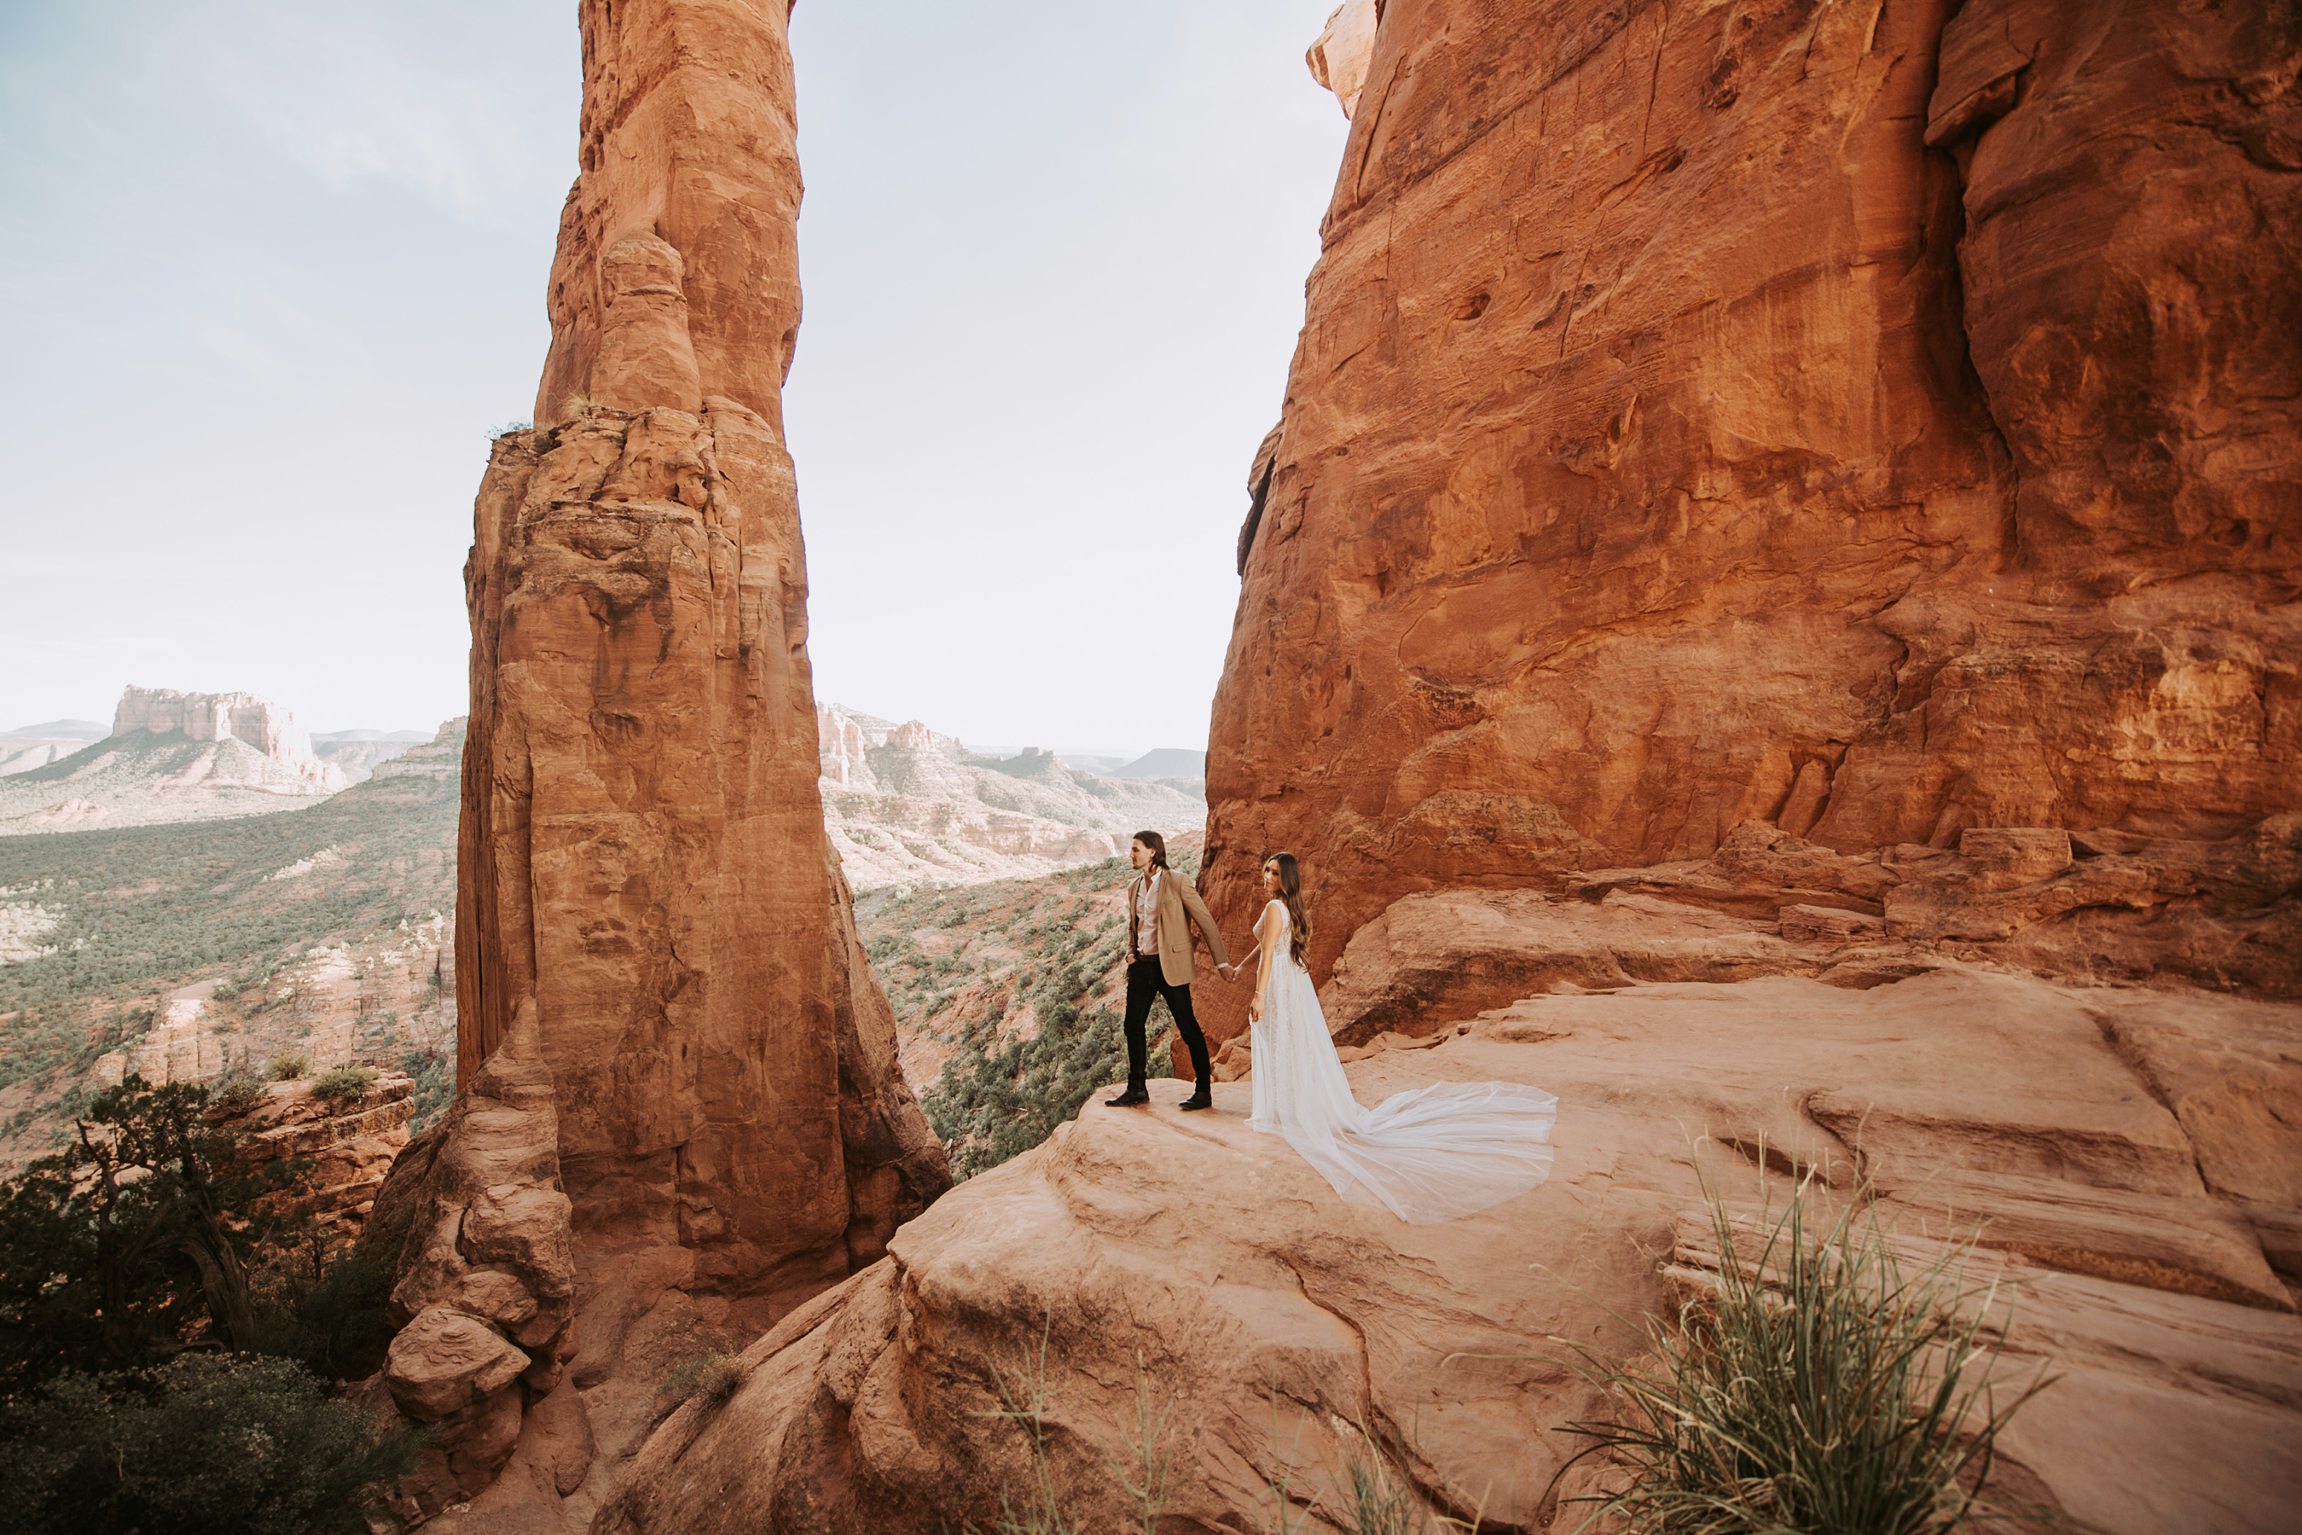 Engagement in Sedona AZ, Elopement in Sedona, Bride and Groom, Harley Davidson Motorcycle, Le Laurier Bridal, Adventurous Elopement, Arizona Wedding Photographer, Engaged, Cathedral Rock Elopement, Adventurous elopement, bohemian bride,